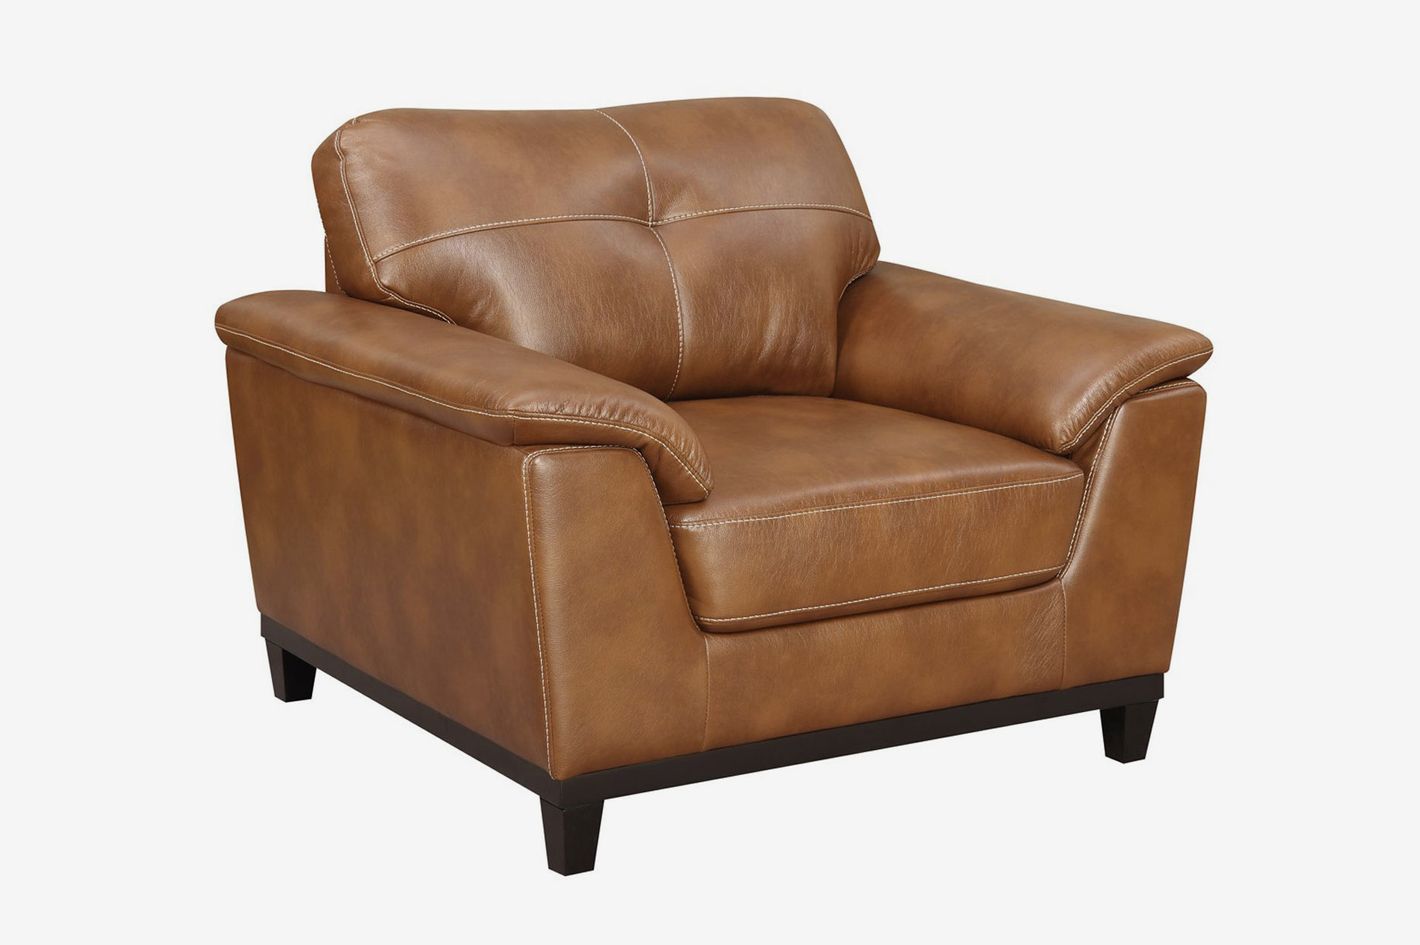 9 Best Lounge Chairs With Back Support, Most Comfortable Leather Chair